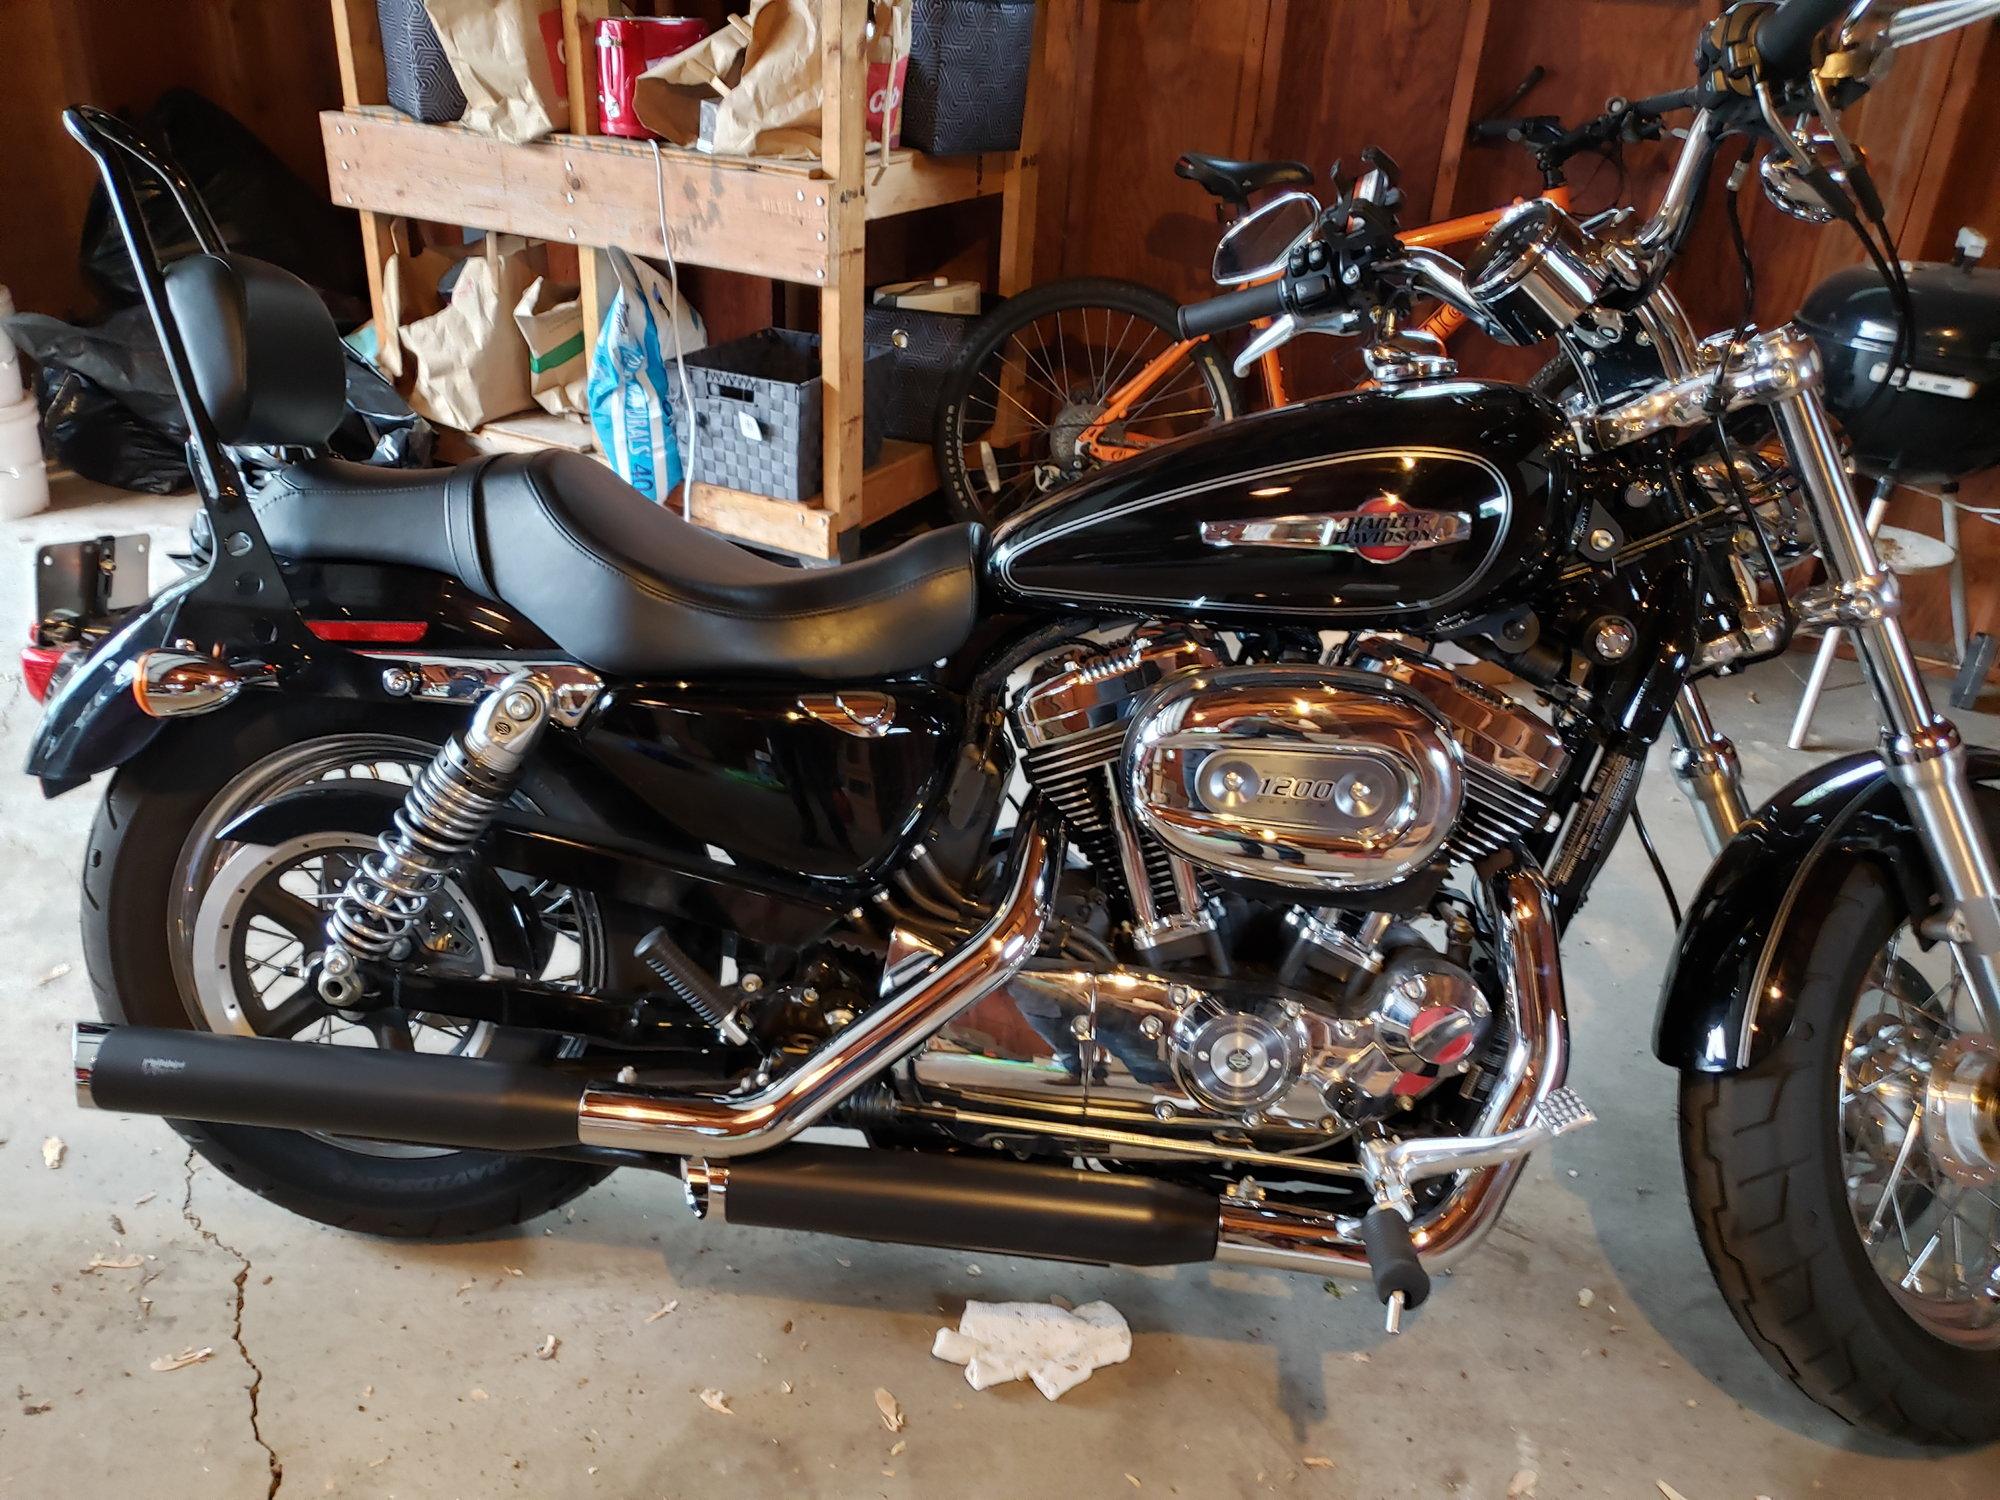 New Slip On Exhaust Backfire Or Decel Popping Harley Davidson Forums